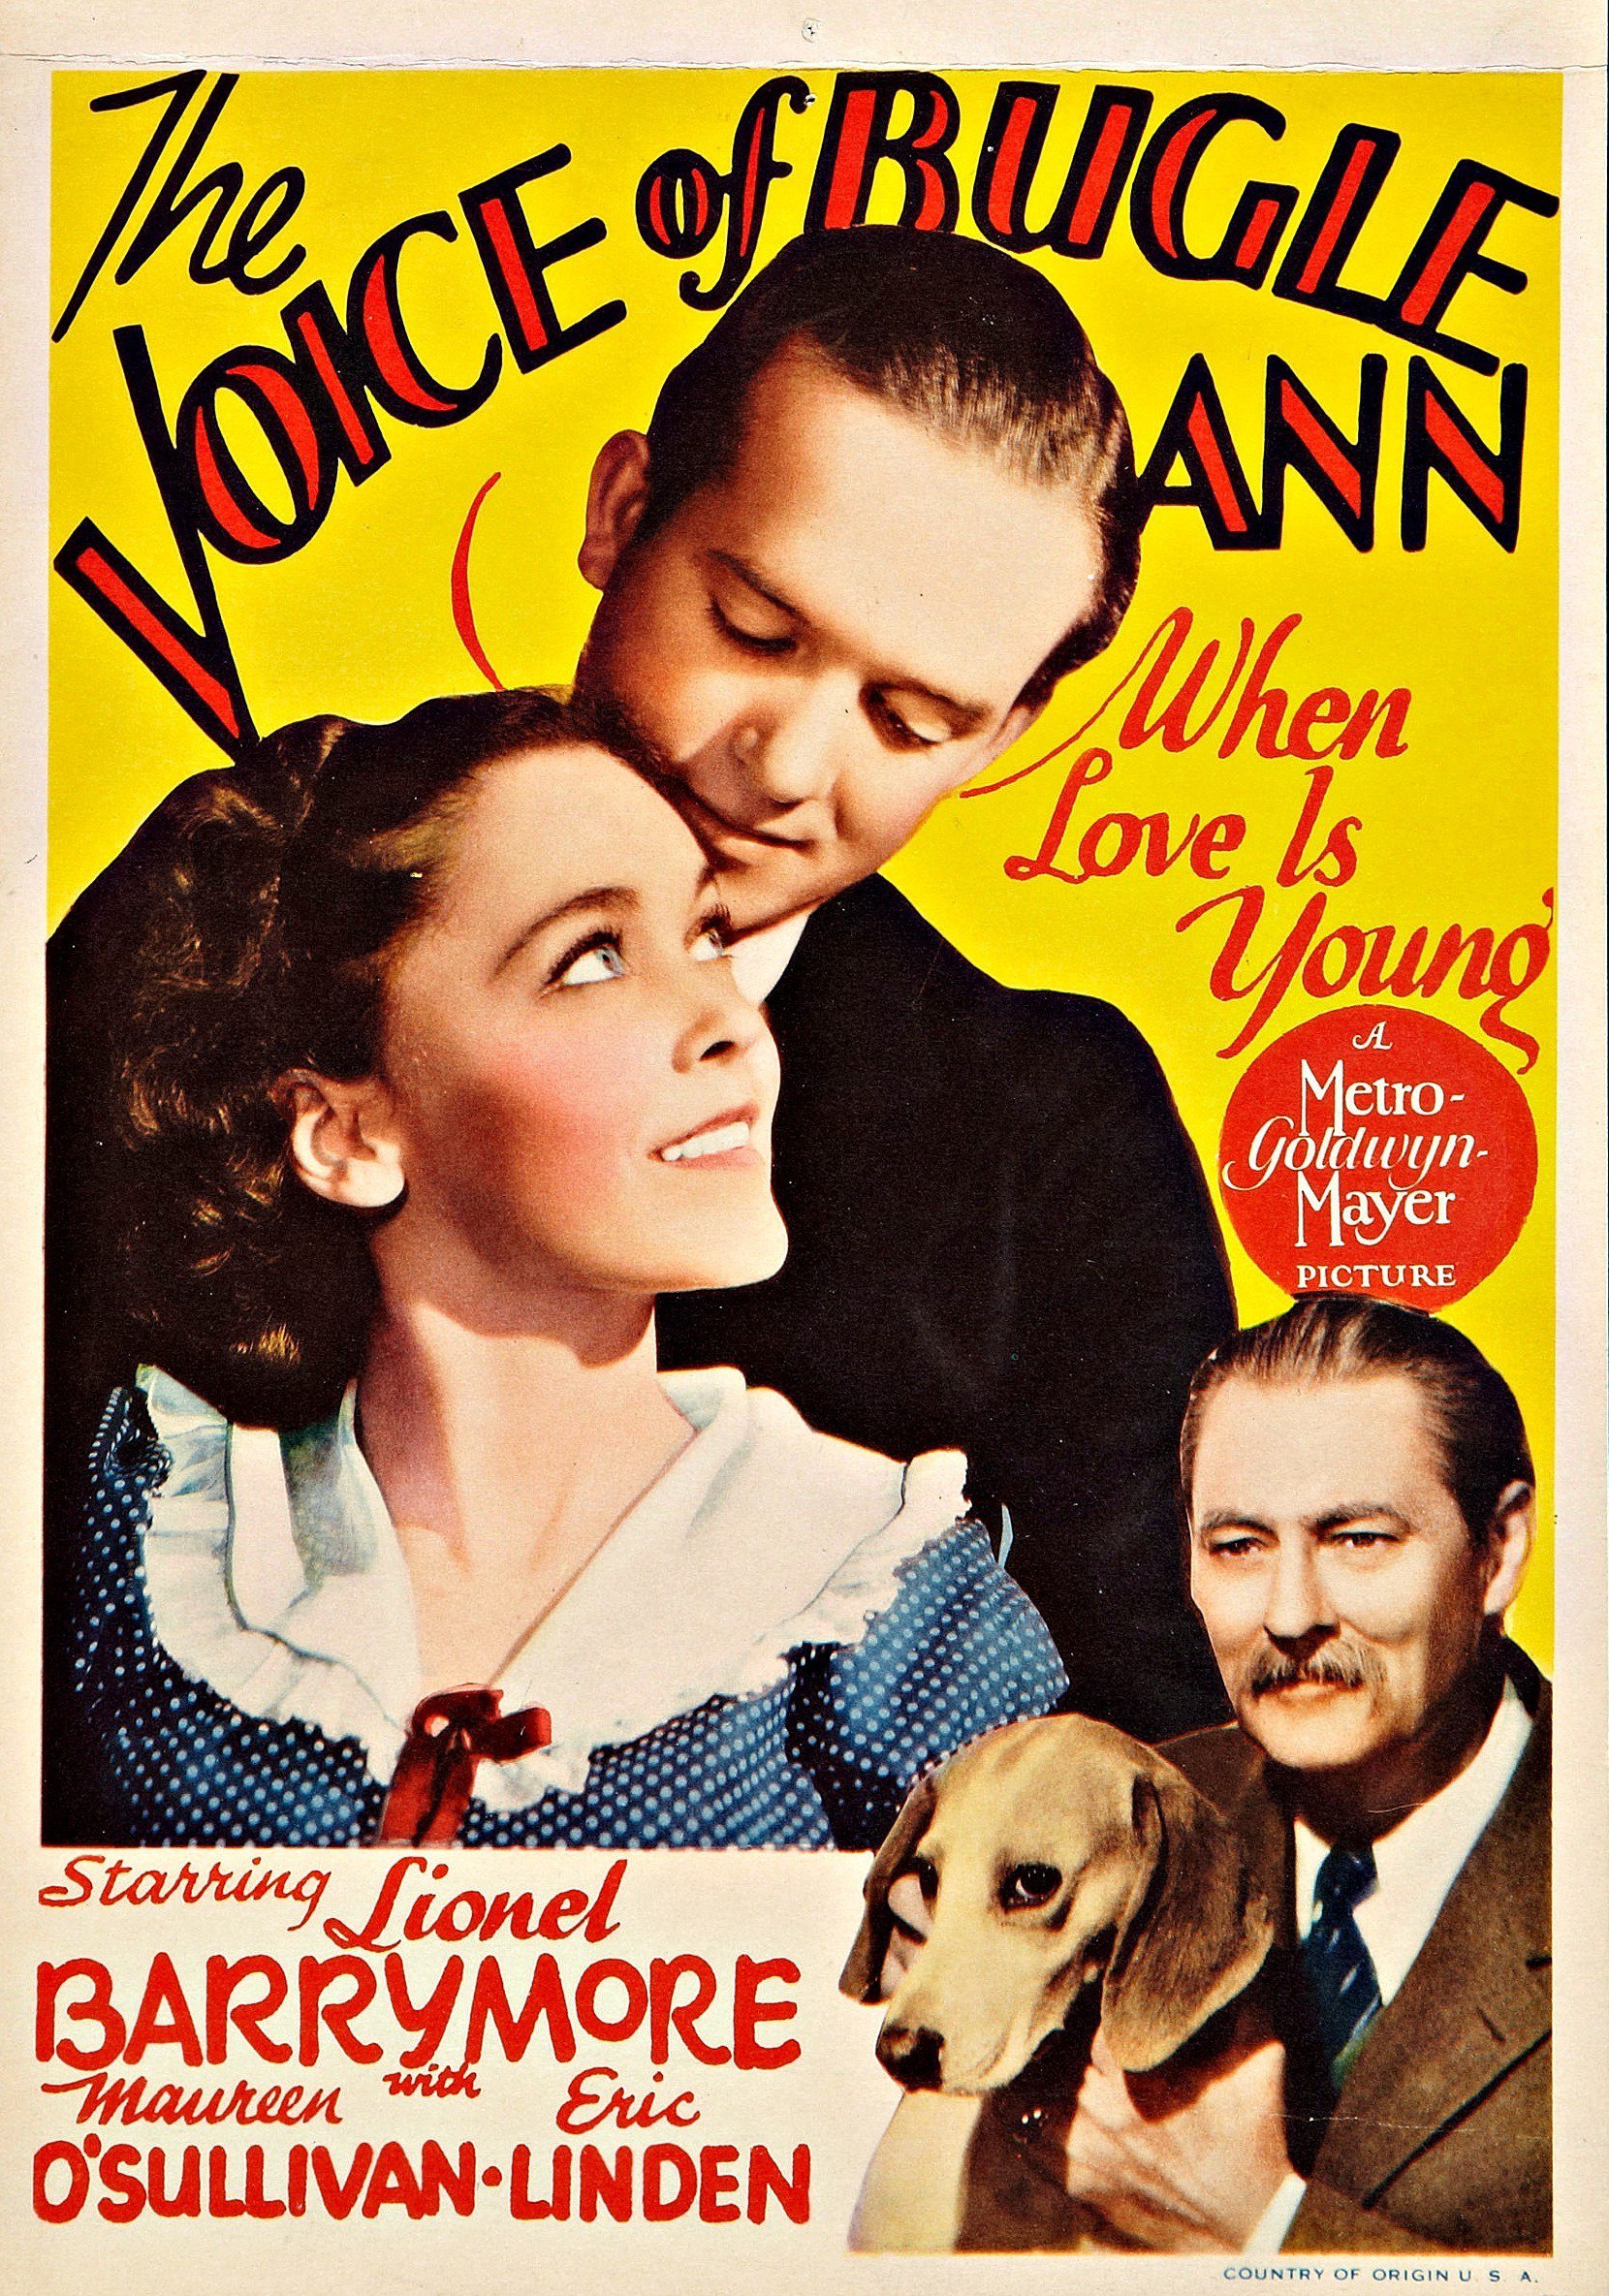 The Voice of Bugle Ann (1936) starring Lionel Barrymore on DVD on DVD